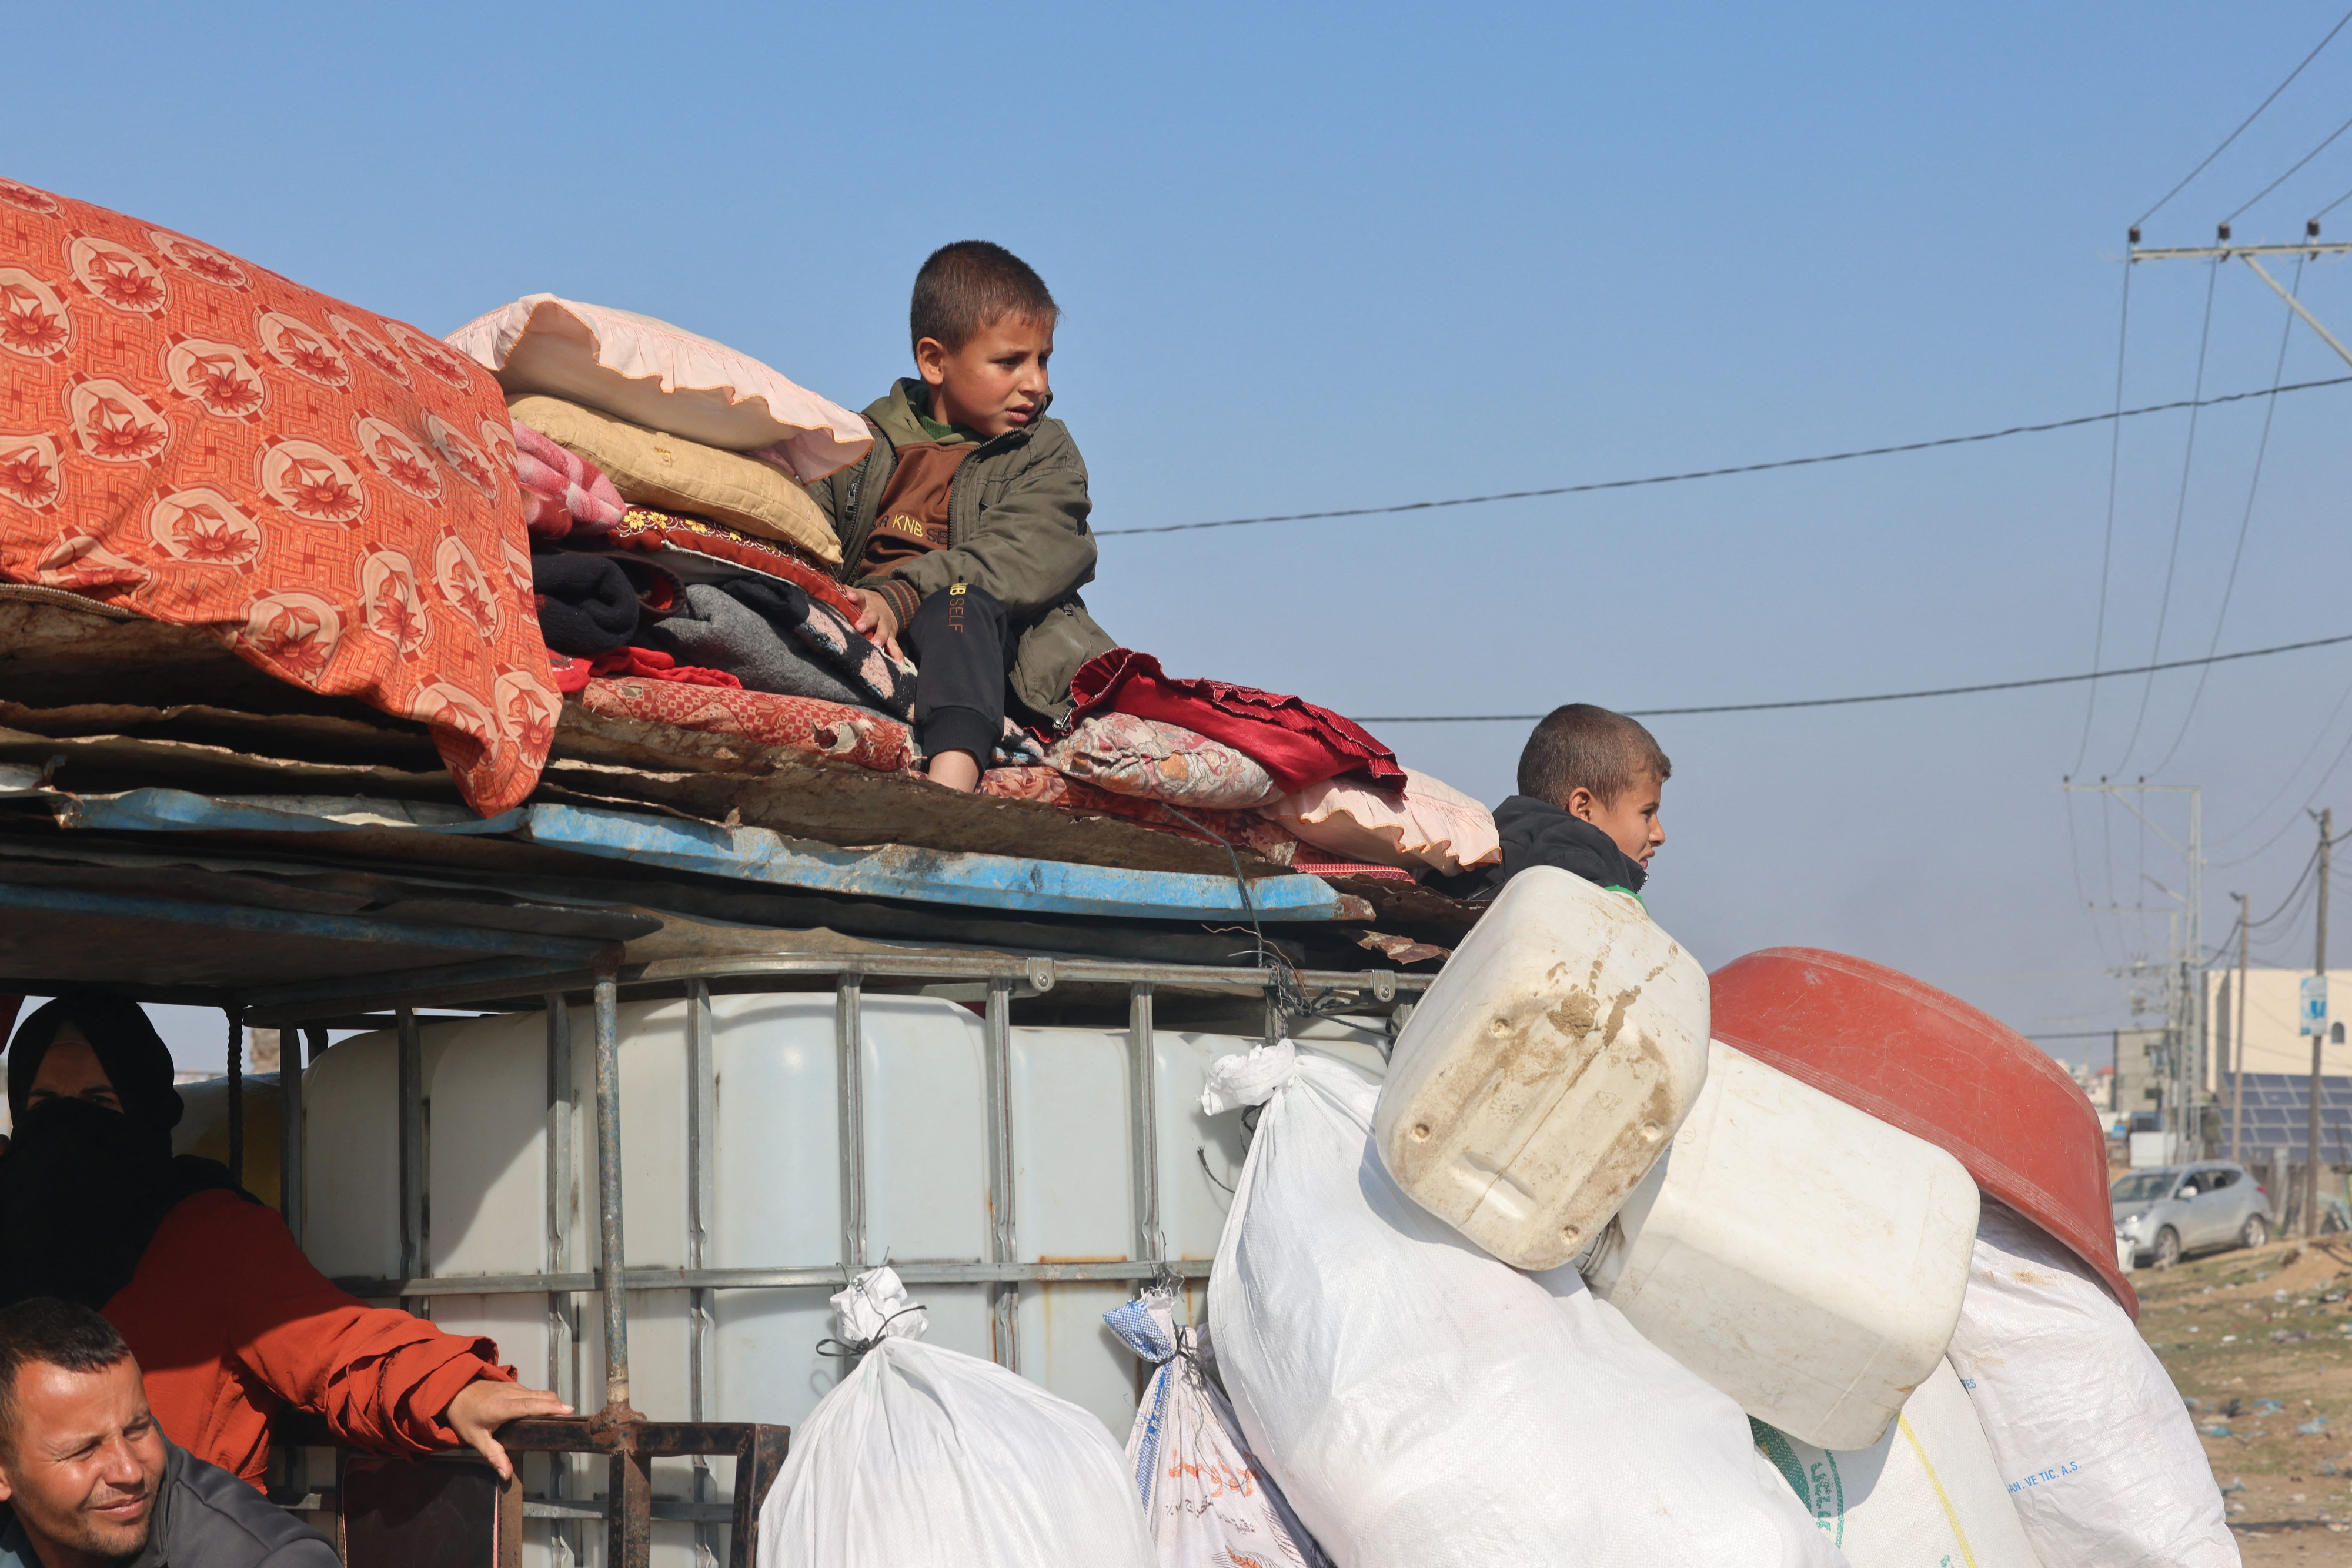 kids sitting on a top of a vehicle carrying empty jugs and pillows